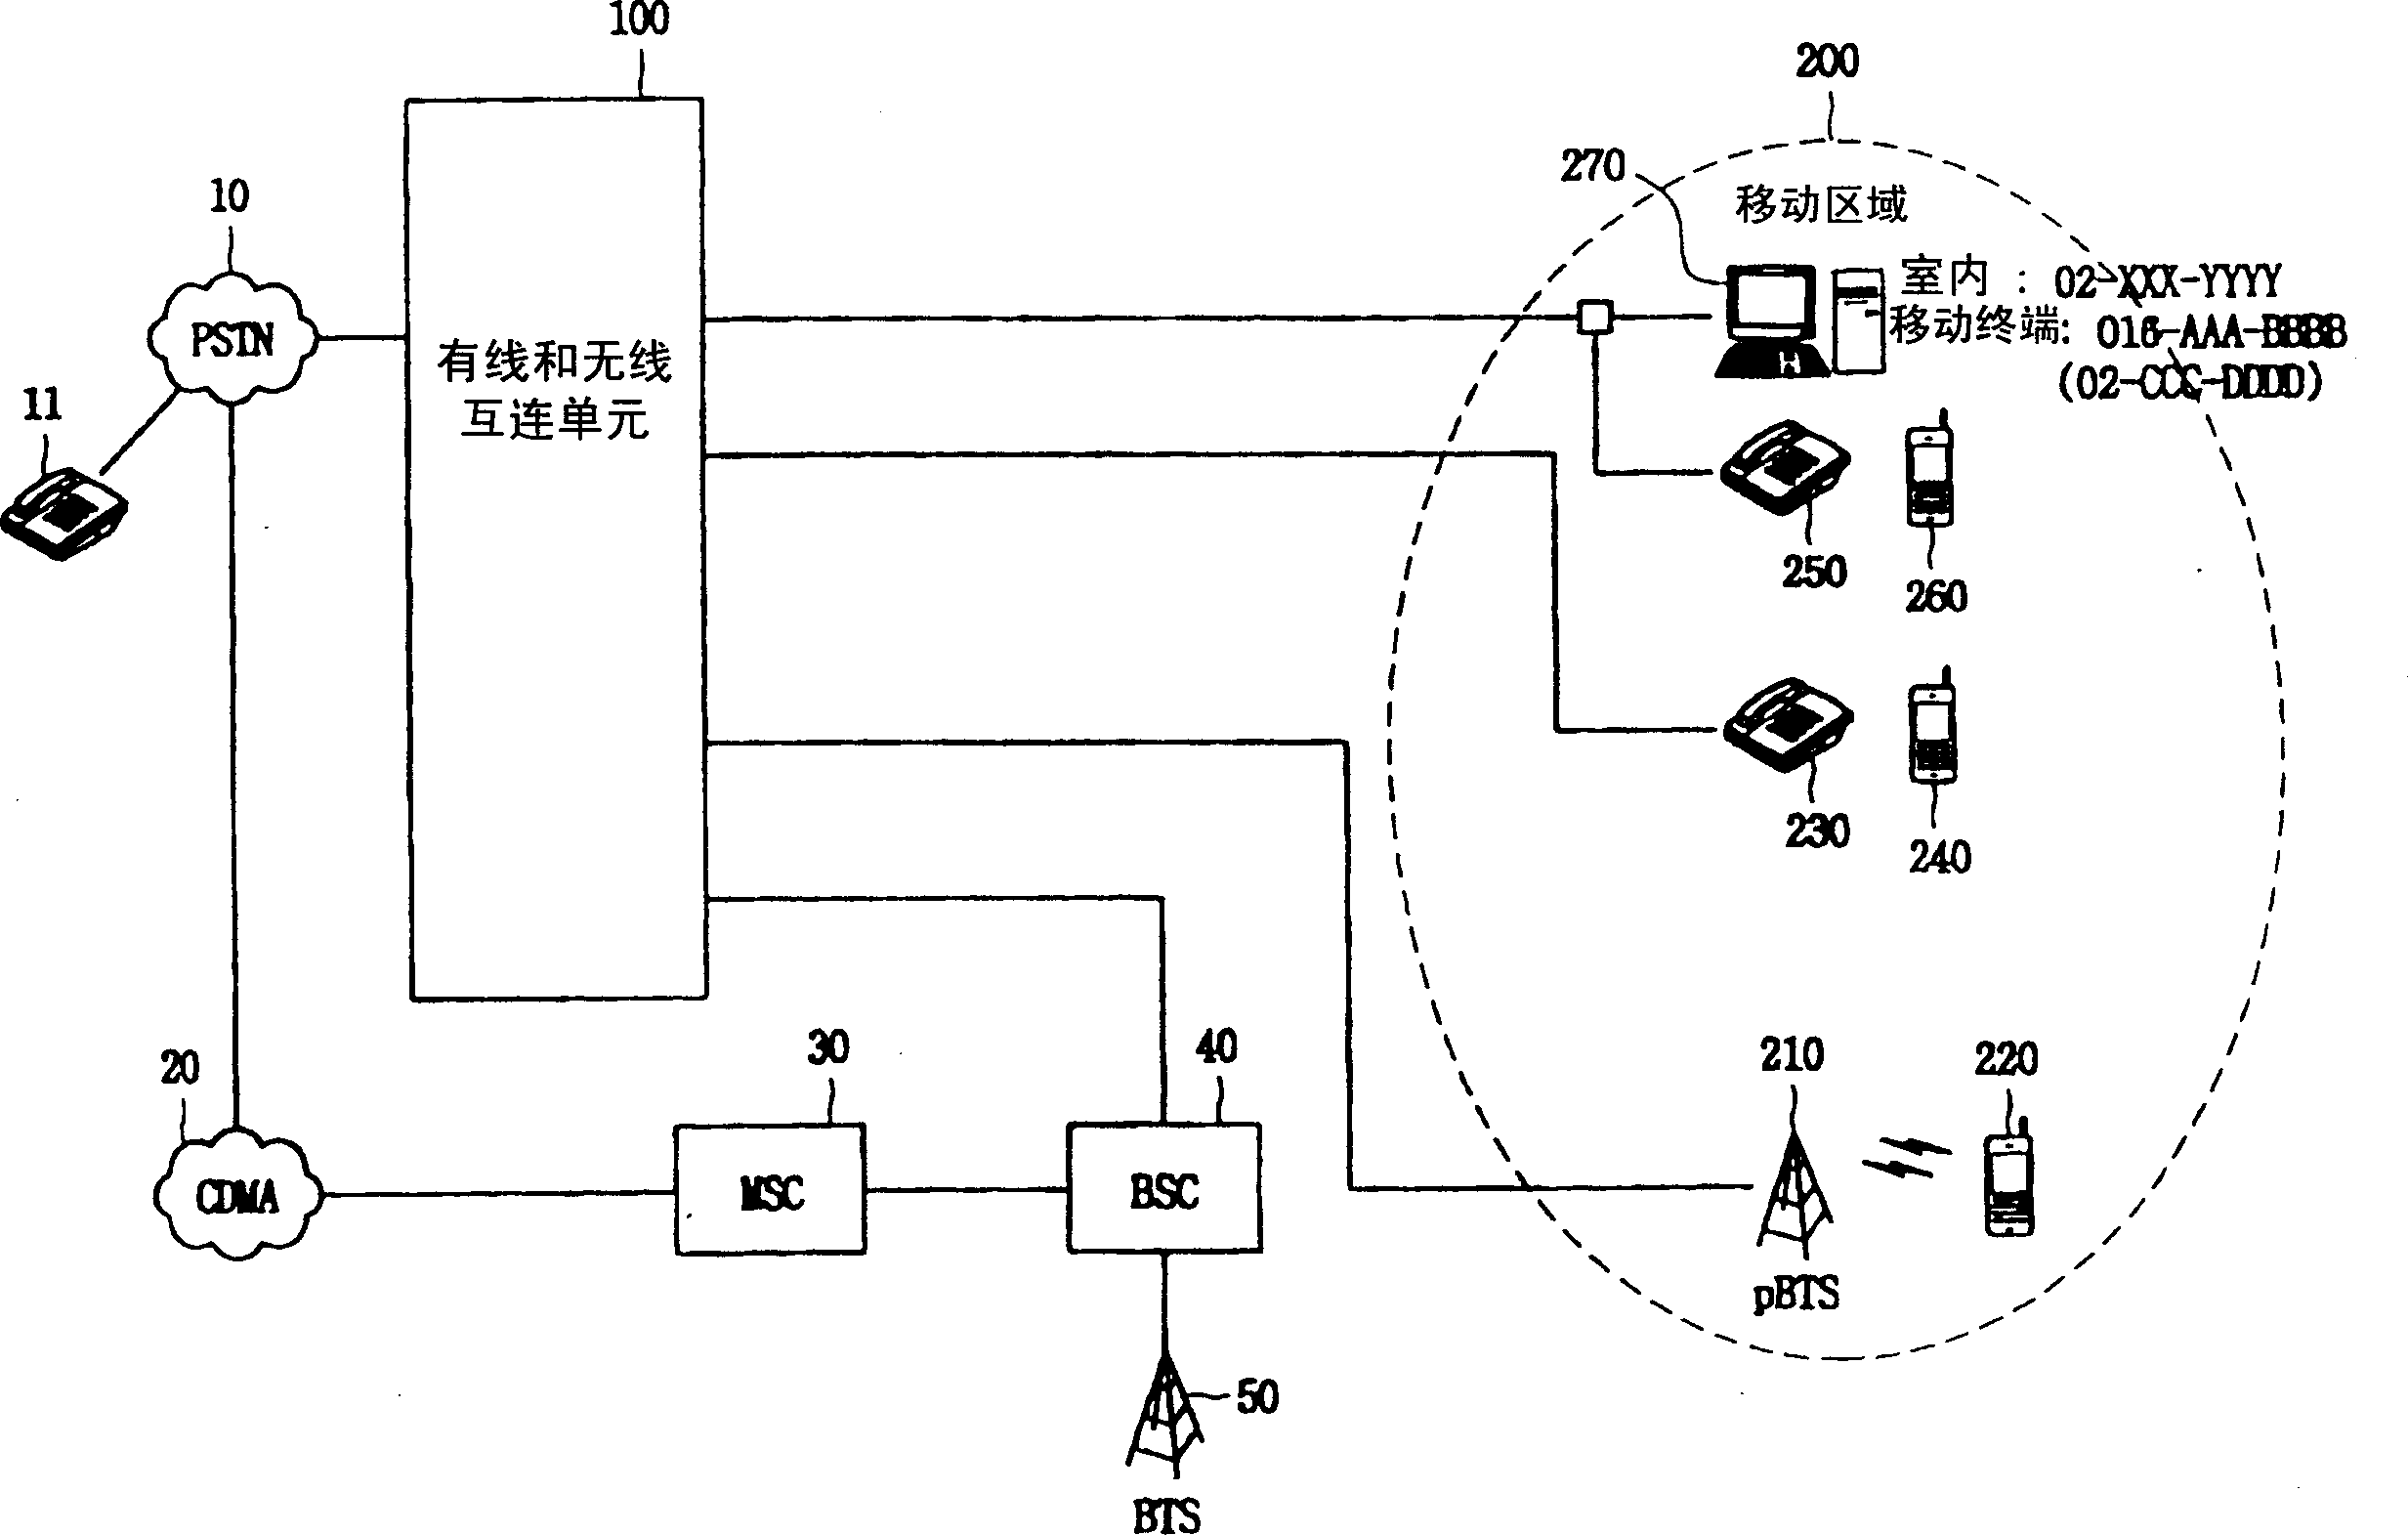 Method for interconnecting of system for interconnecting wired and wireless phone services